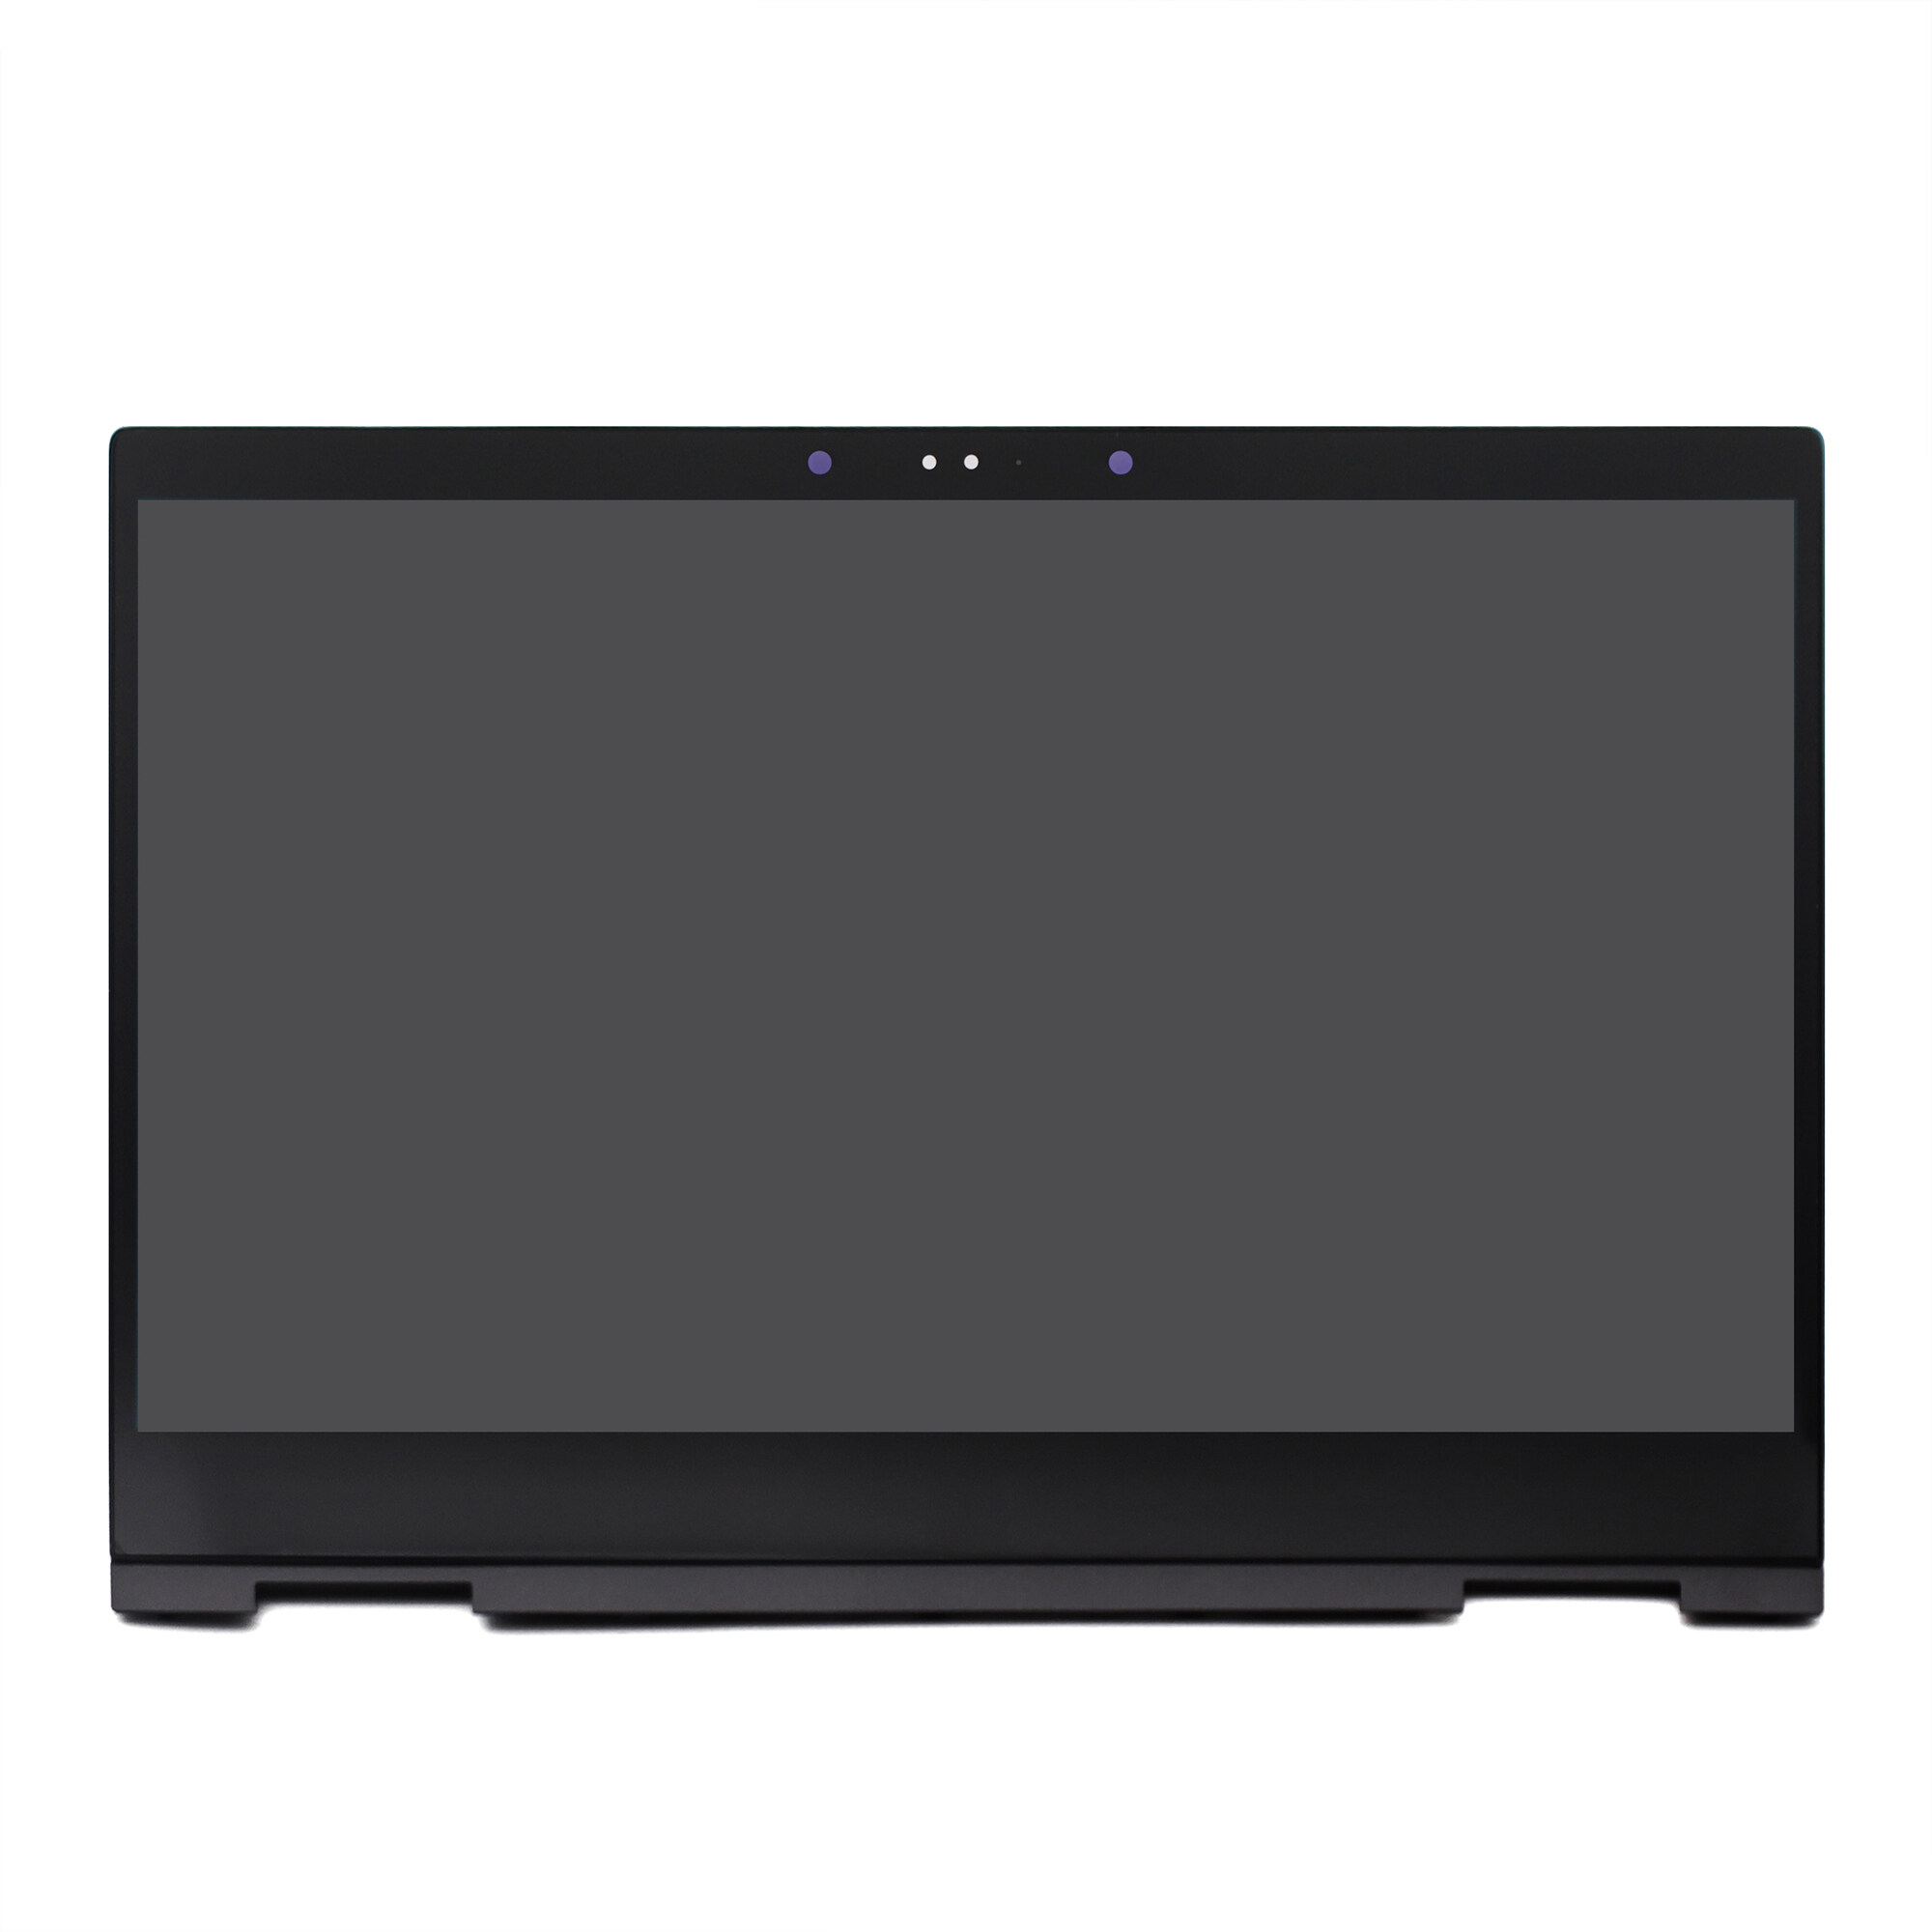 Kreplacement 13.3" Laptop LED LCD Touch Screen Assembly With Bezel For HP Evny x360 13-ag series 1920x1080